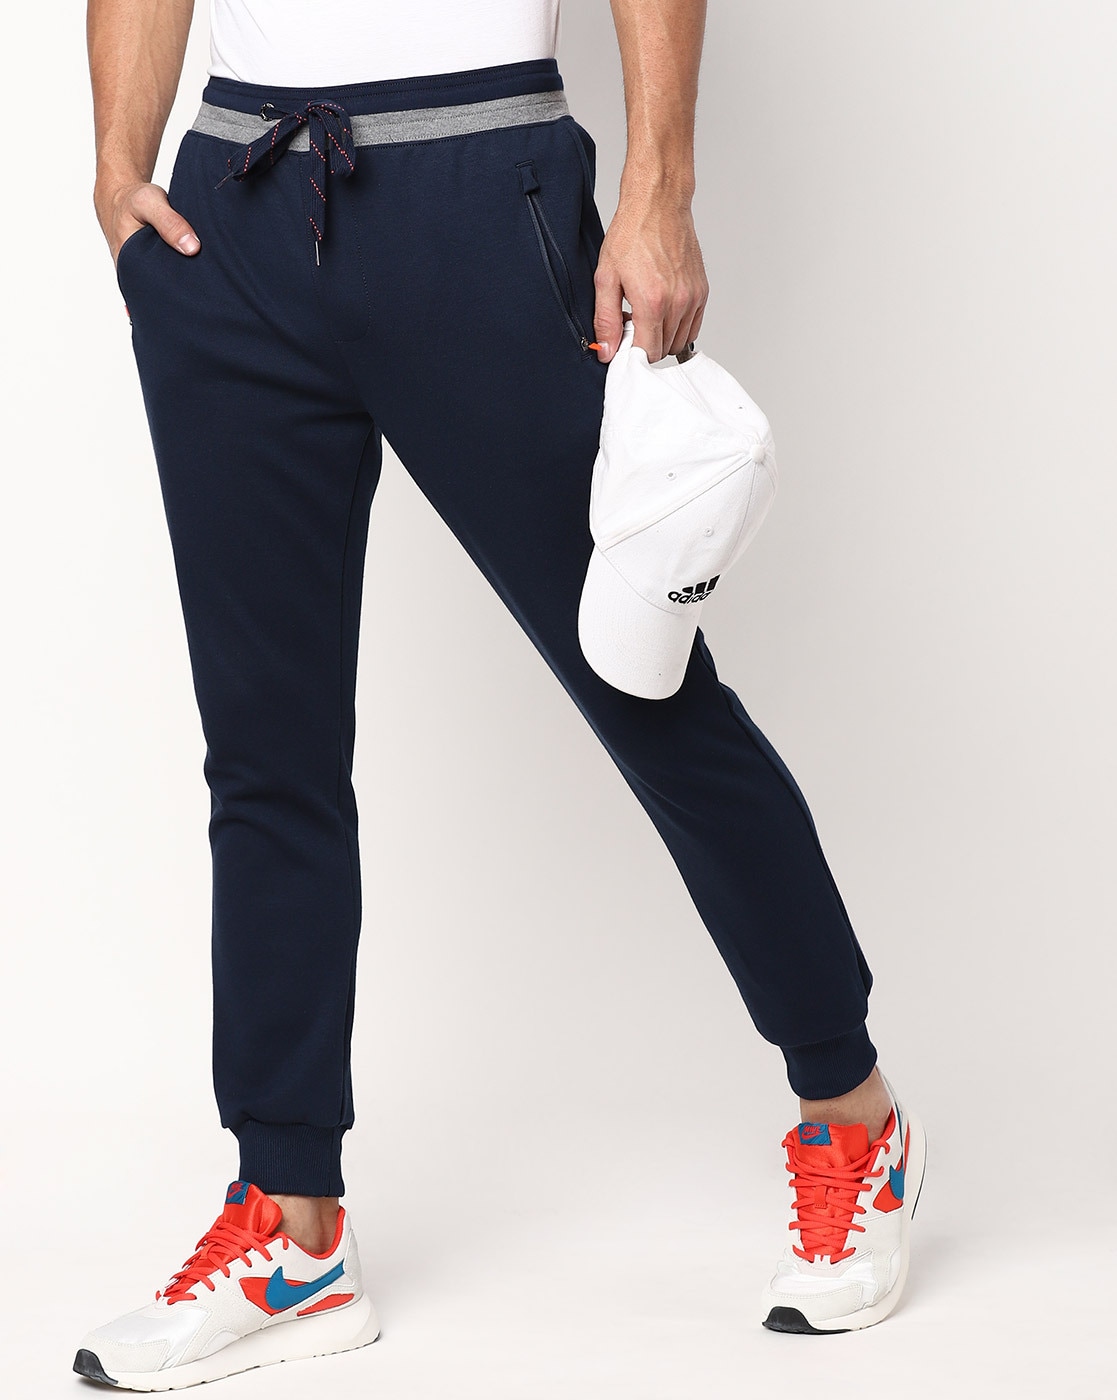 Buy Jockey Men Grey Solid Slim fit Track pants Online at Low Prices in  India - Paytmmall.com